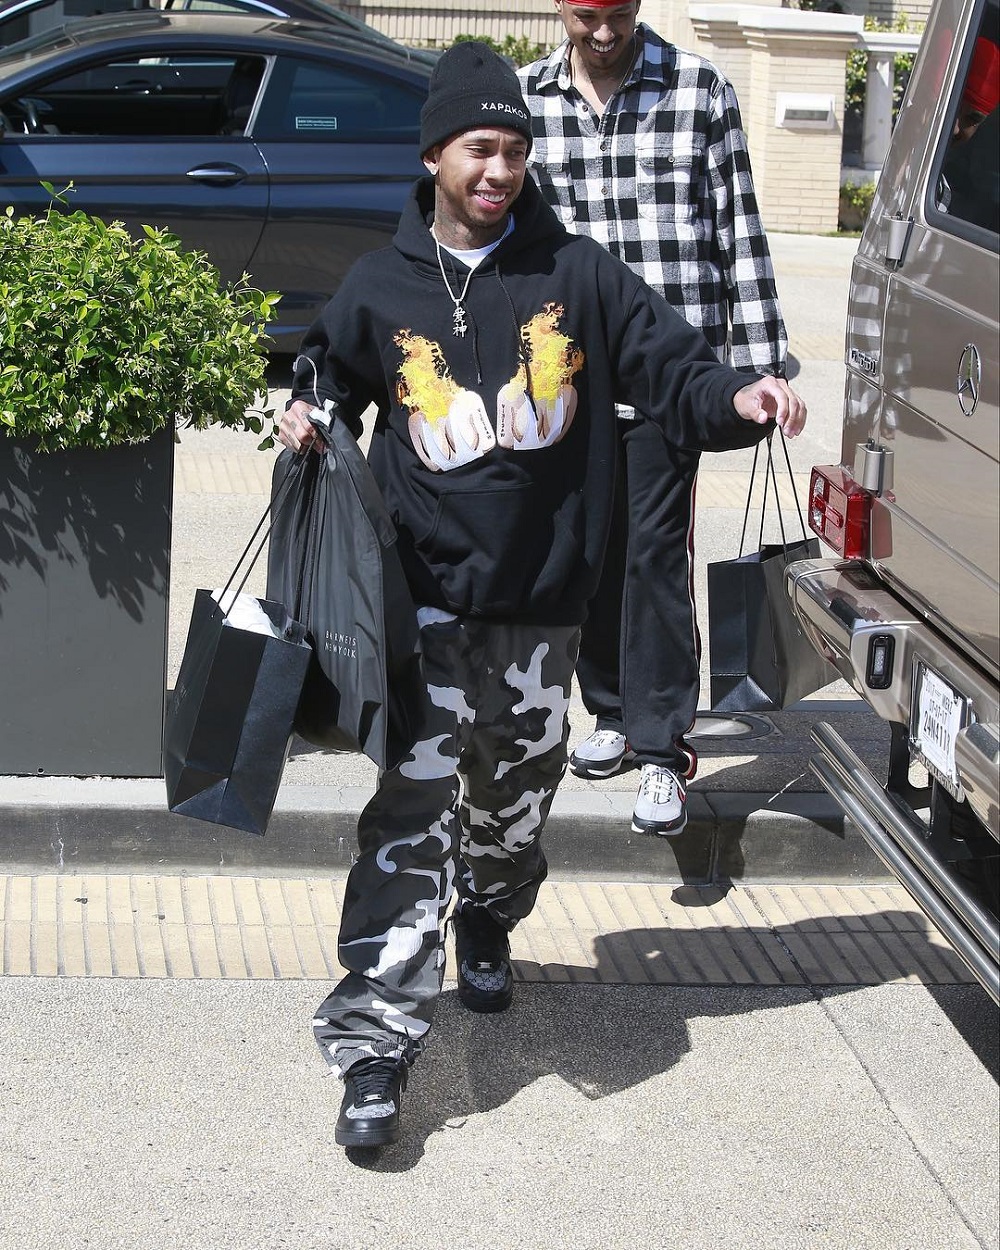 SPOTTED: Tyga in Pharrell x Louis Vuitton Wears Millionaire Sunglasses and  Louis Vuitton Shirt